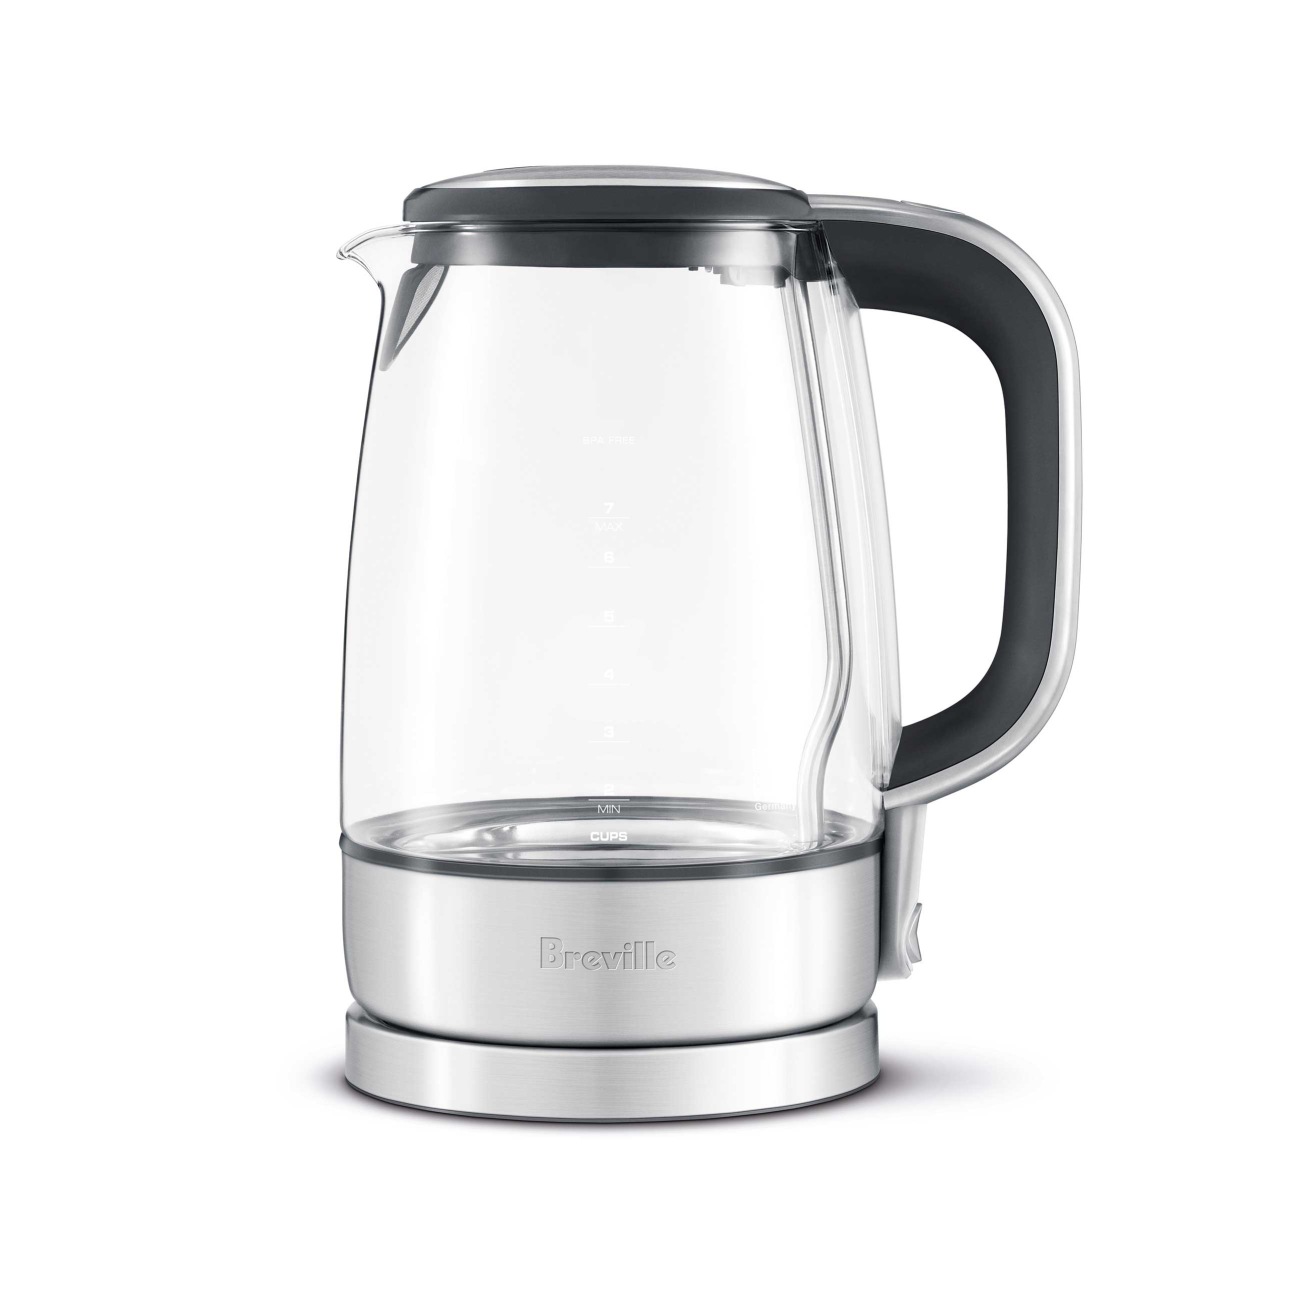 Transparent Electric Kettles: Transparent electric kettles that offer a  clear view of boiling water